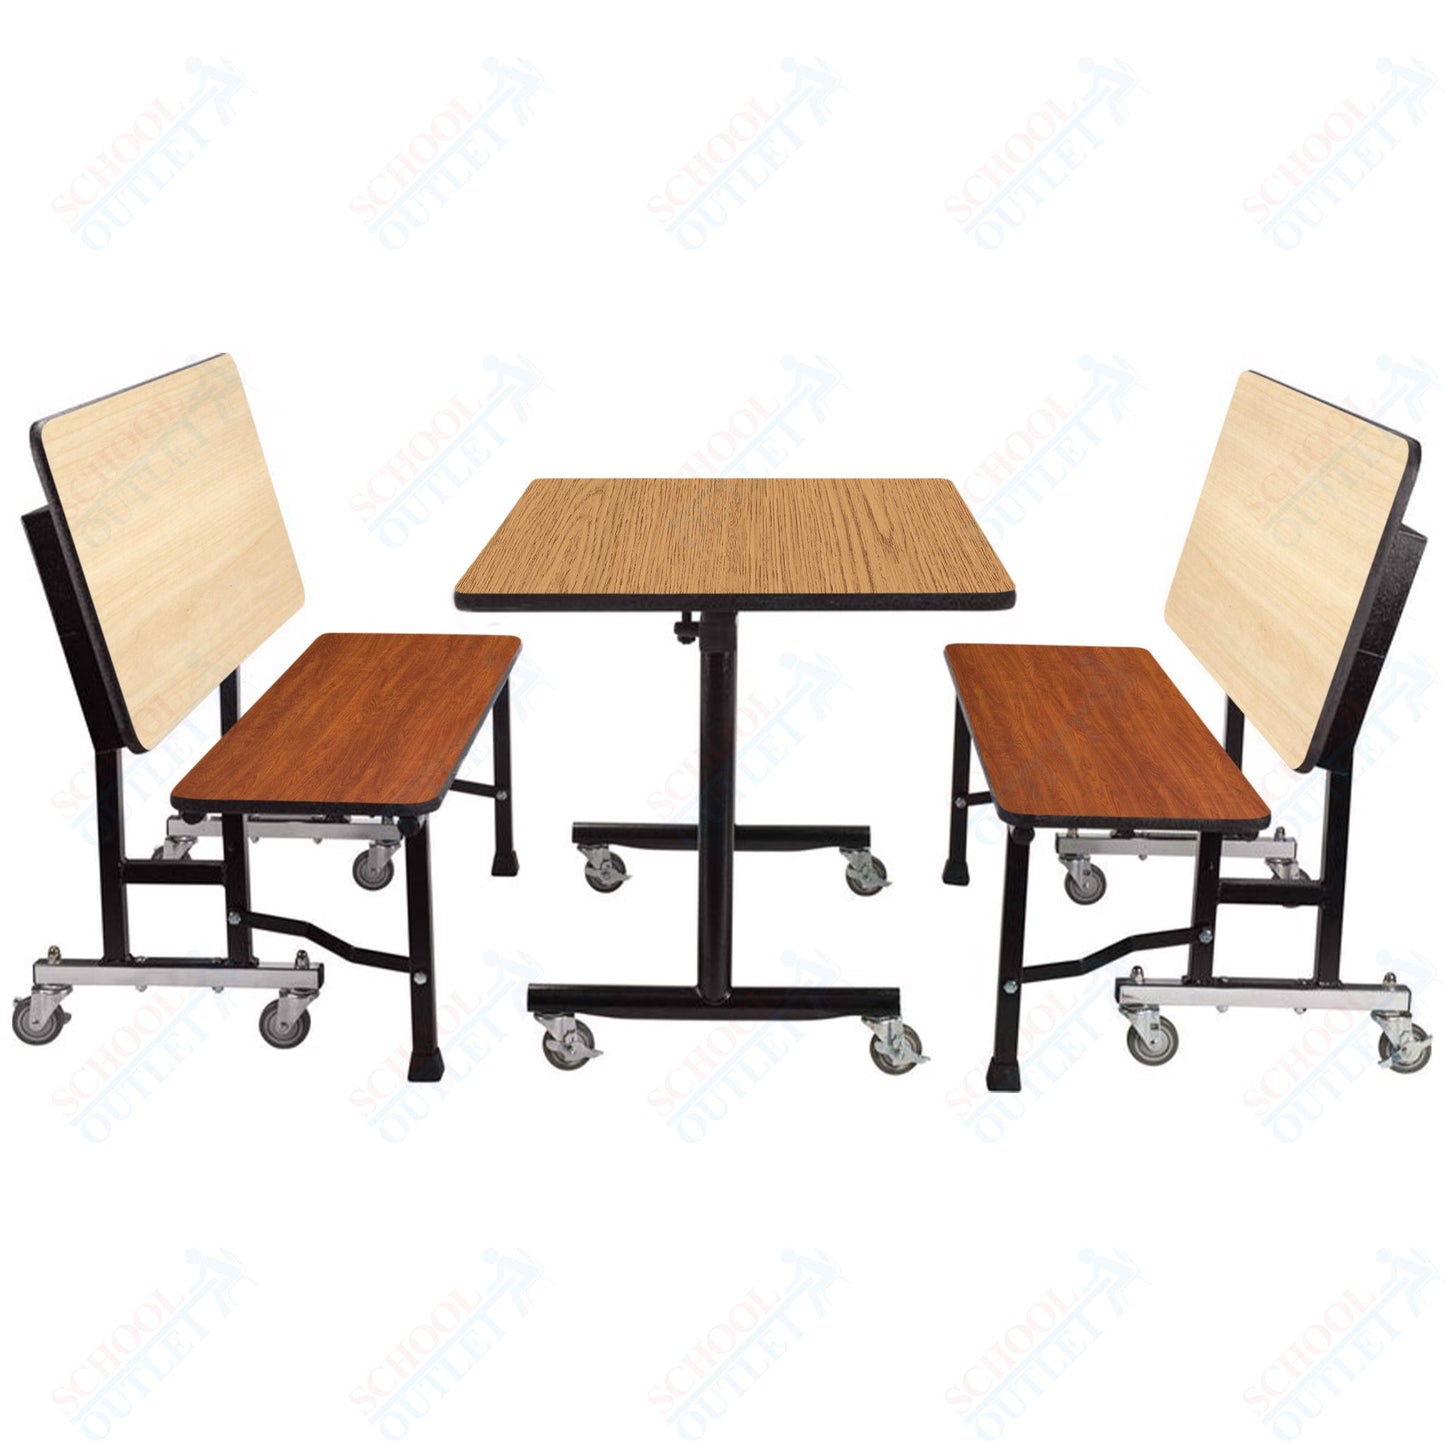 NPS ToGo Booth Set, (1) 30"x60" Table and (2) 60" Benches, MDF Core (National Public Seating NPS-TGBTH3060MDPE)